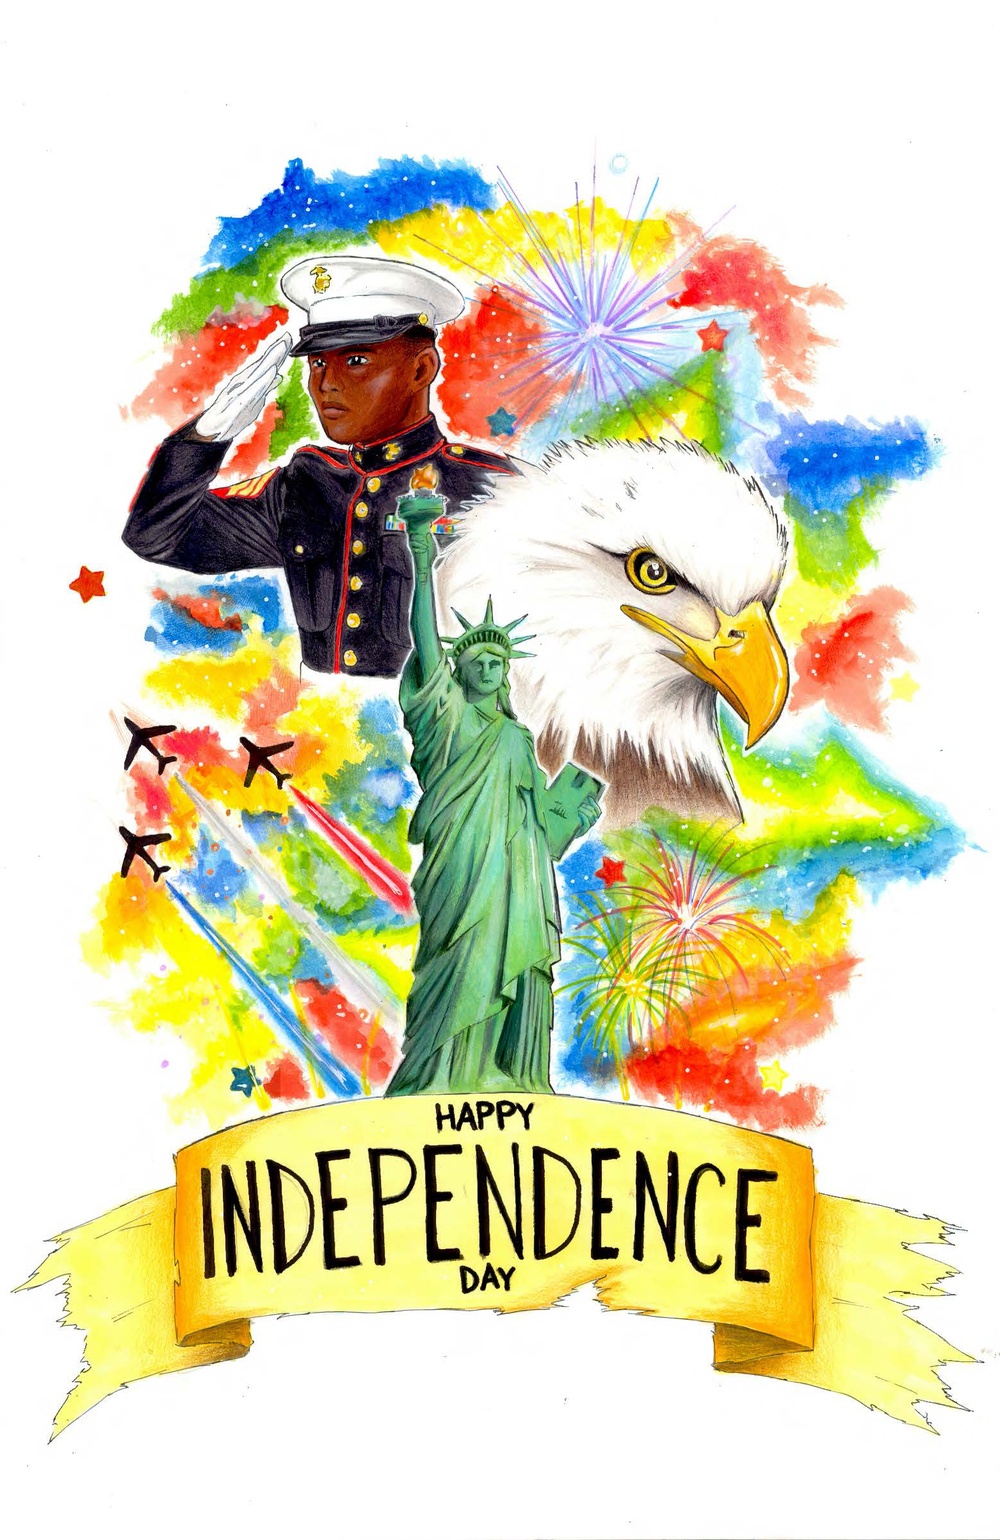 July 4th - Independence Day